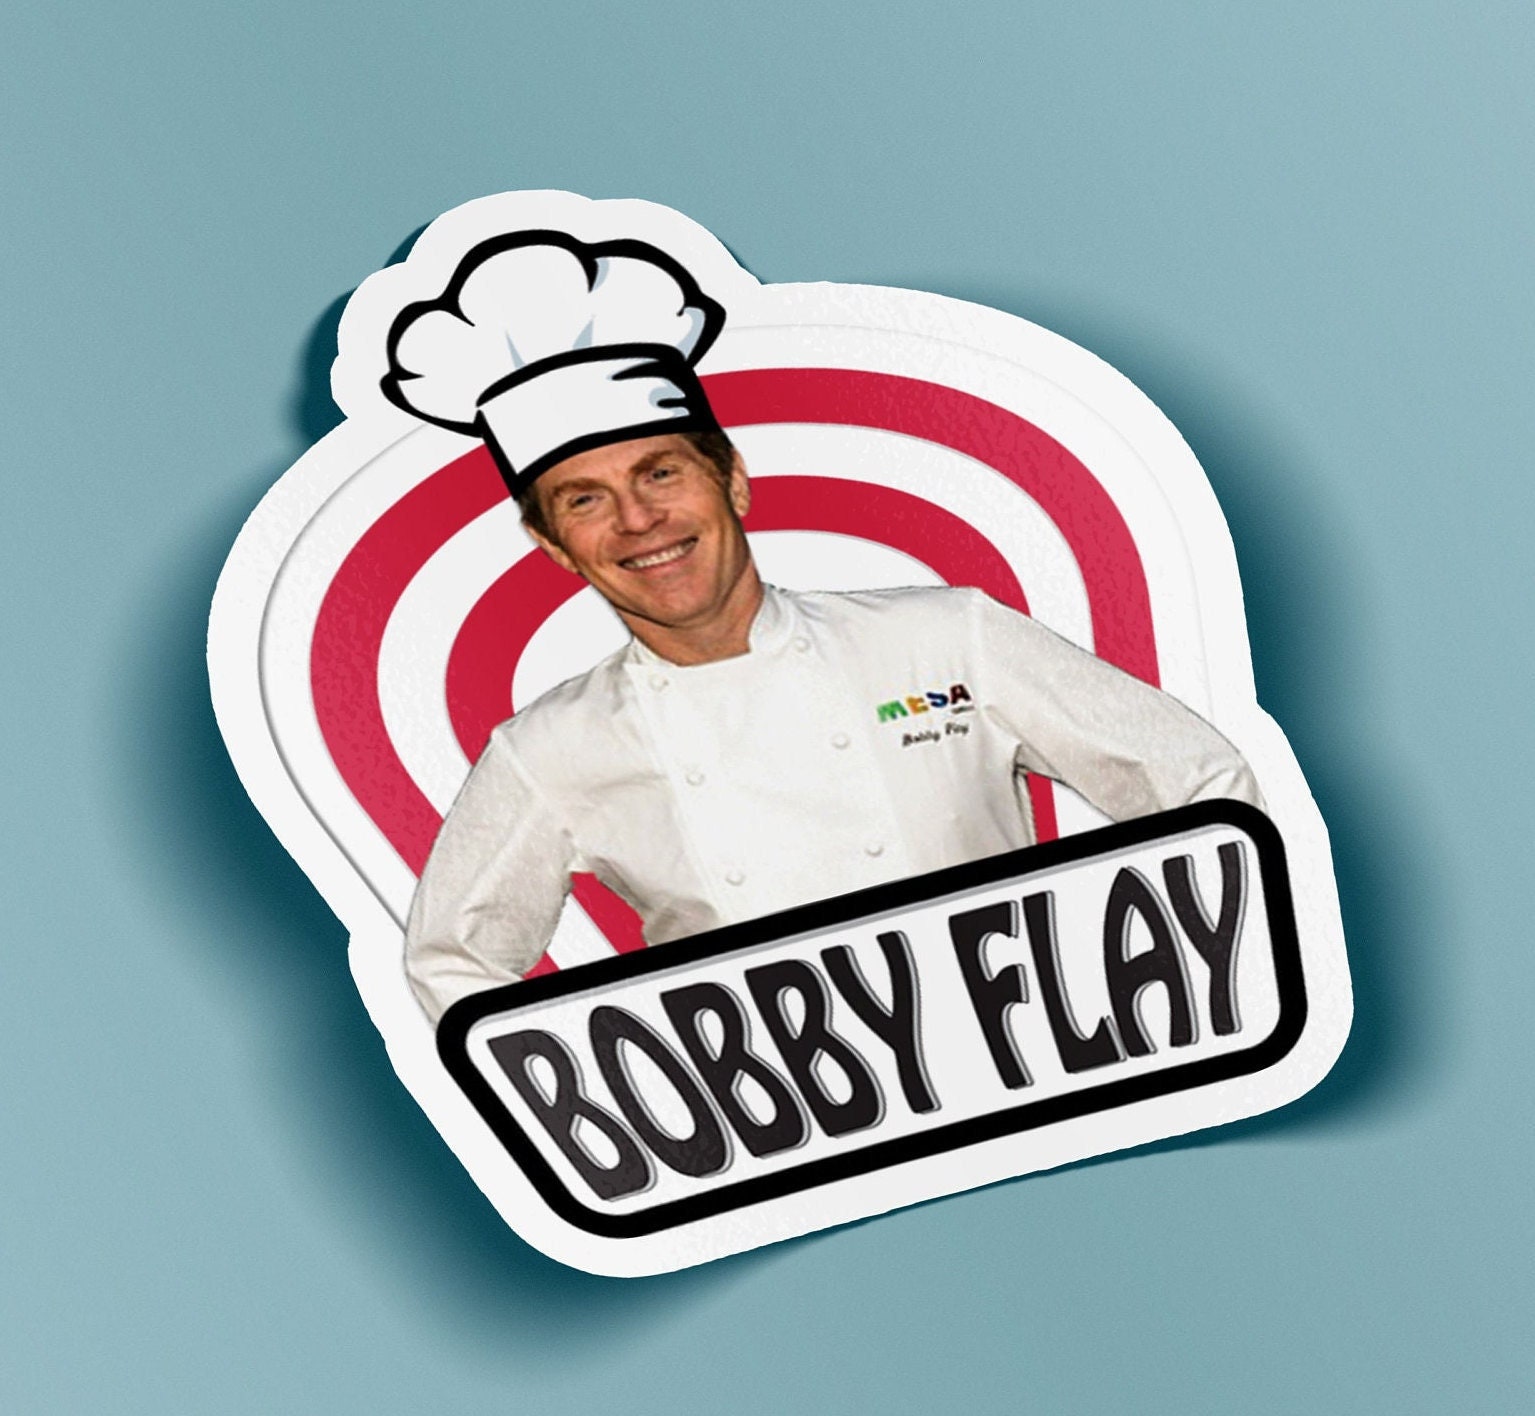 Bobby Flay - Day #2 of holiday gift ideas. People ask me